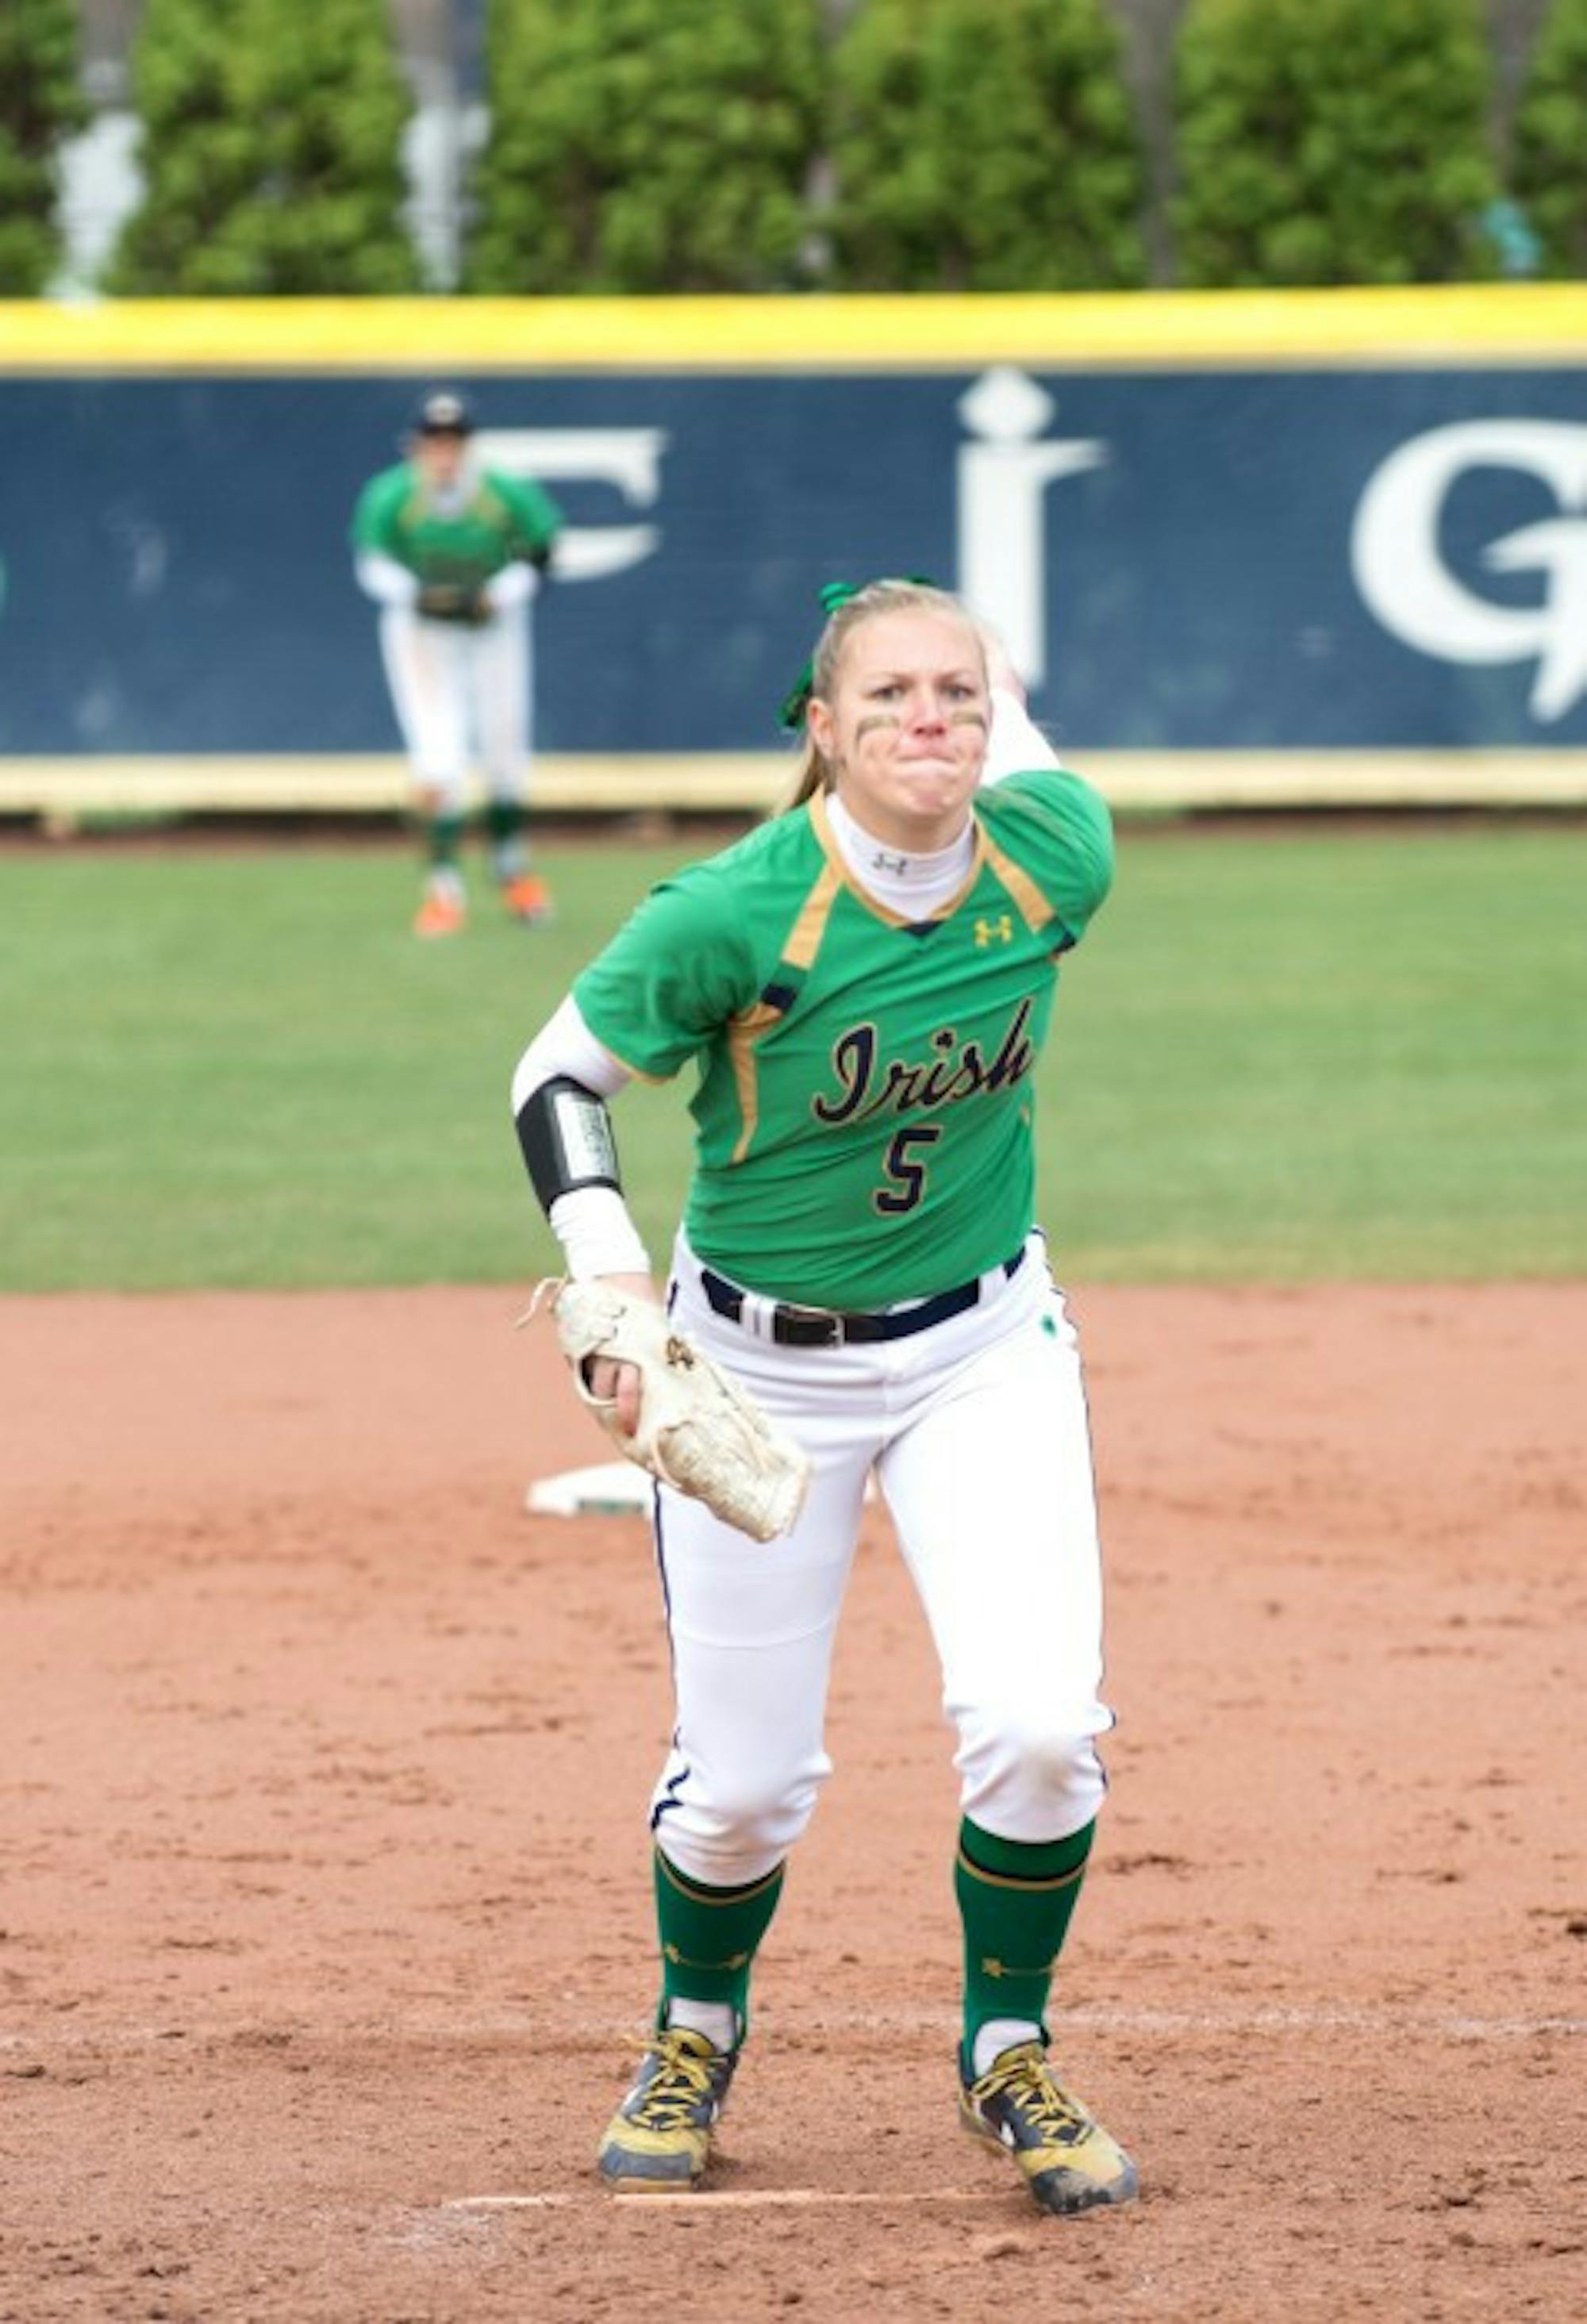 Irish senior Allie Rhodes delivers a pitch during Notre Dame's 5-4 win over Florida State on Sunday at Melissa Cook Stadium.